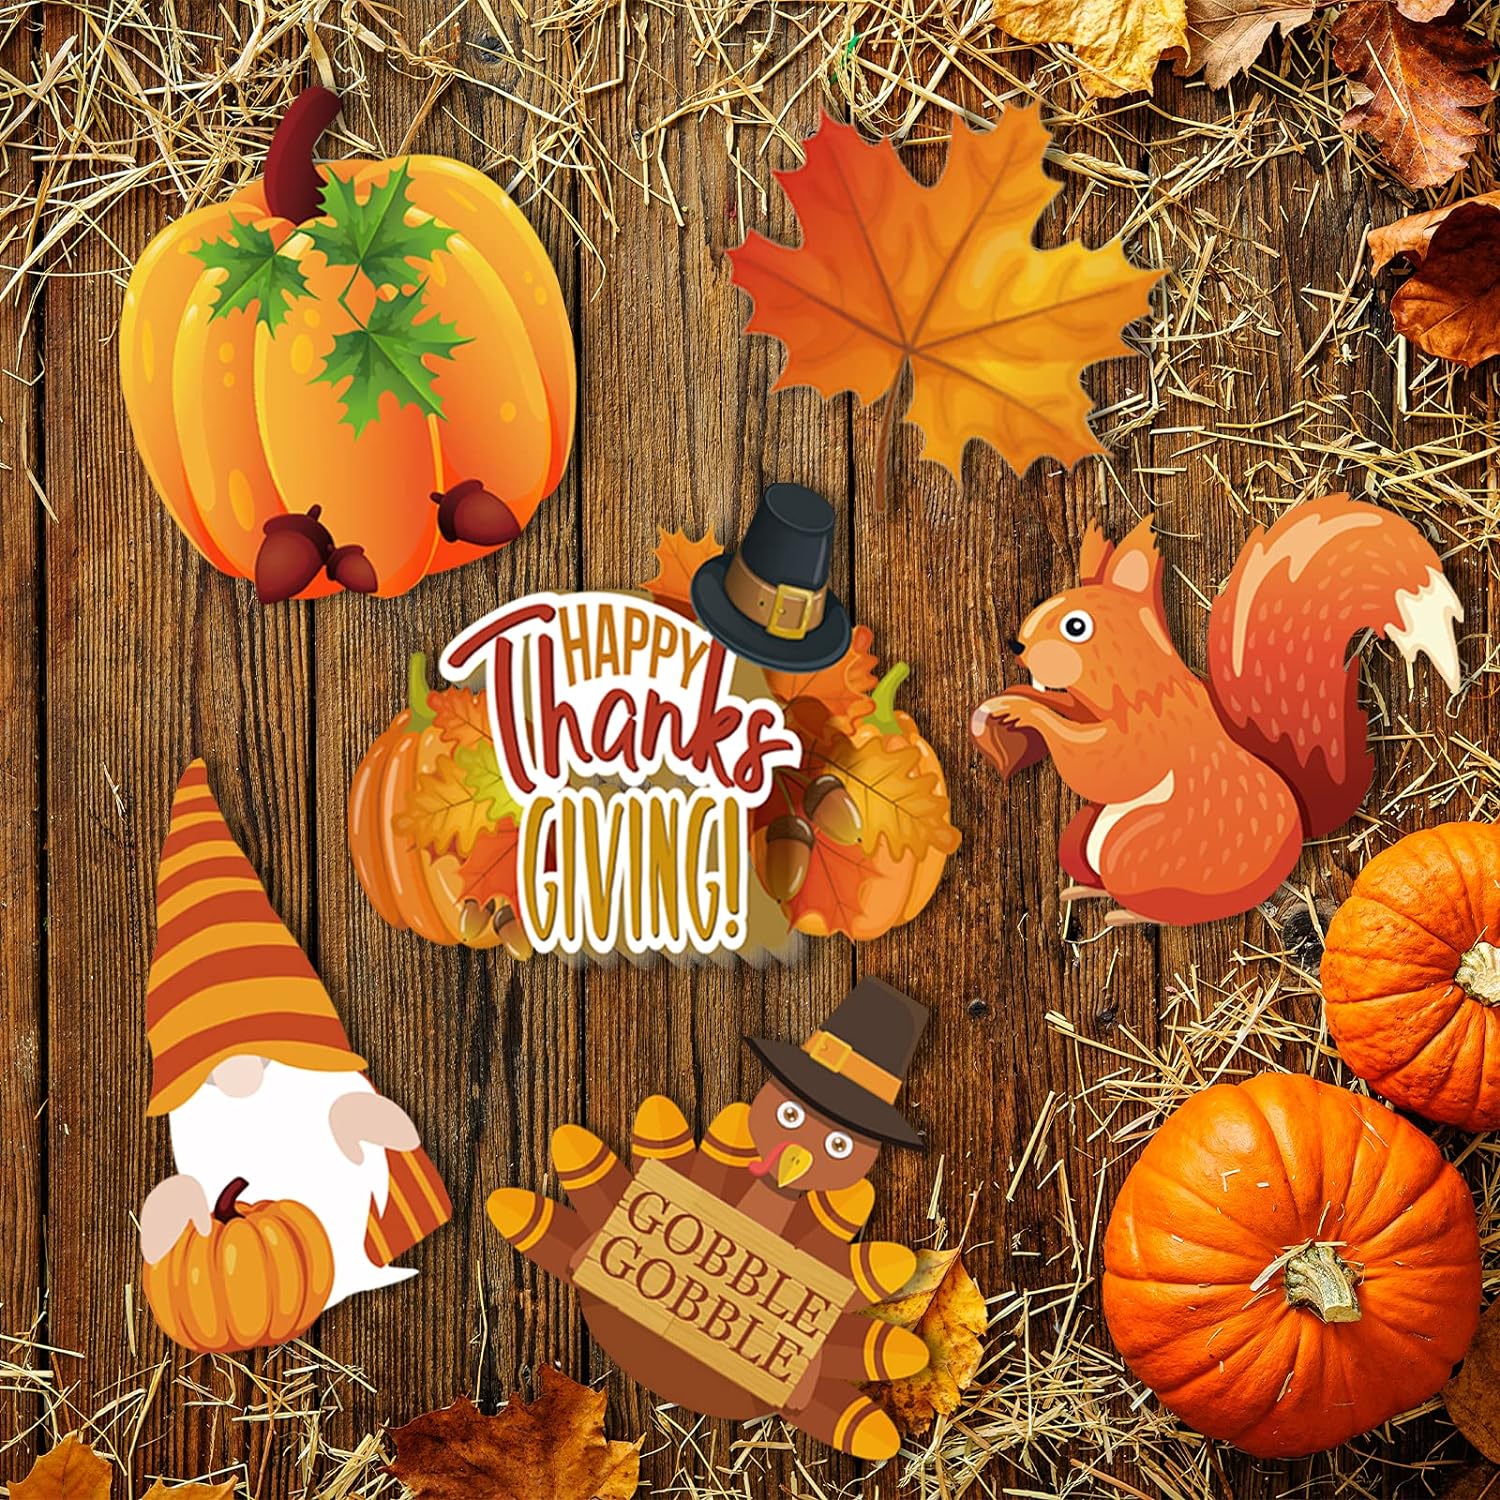 Amazon.com : Thanksgiving Yard Signs Stakes Outdoor Decorations - 6PCS Fall Lawn Decorations Signs - Maple, Squirrel, Turkey, Gnome, Pumpkin Corrugated Yard Decorations for Fall Thanksgiving Decorations Outside : Patio, Lawn  Garden